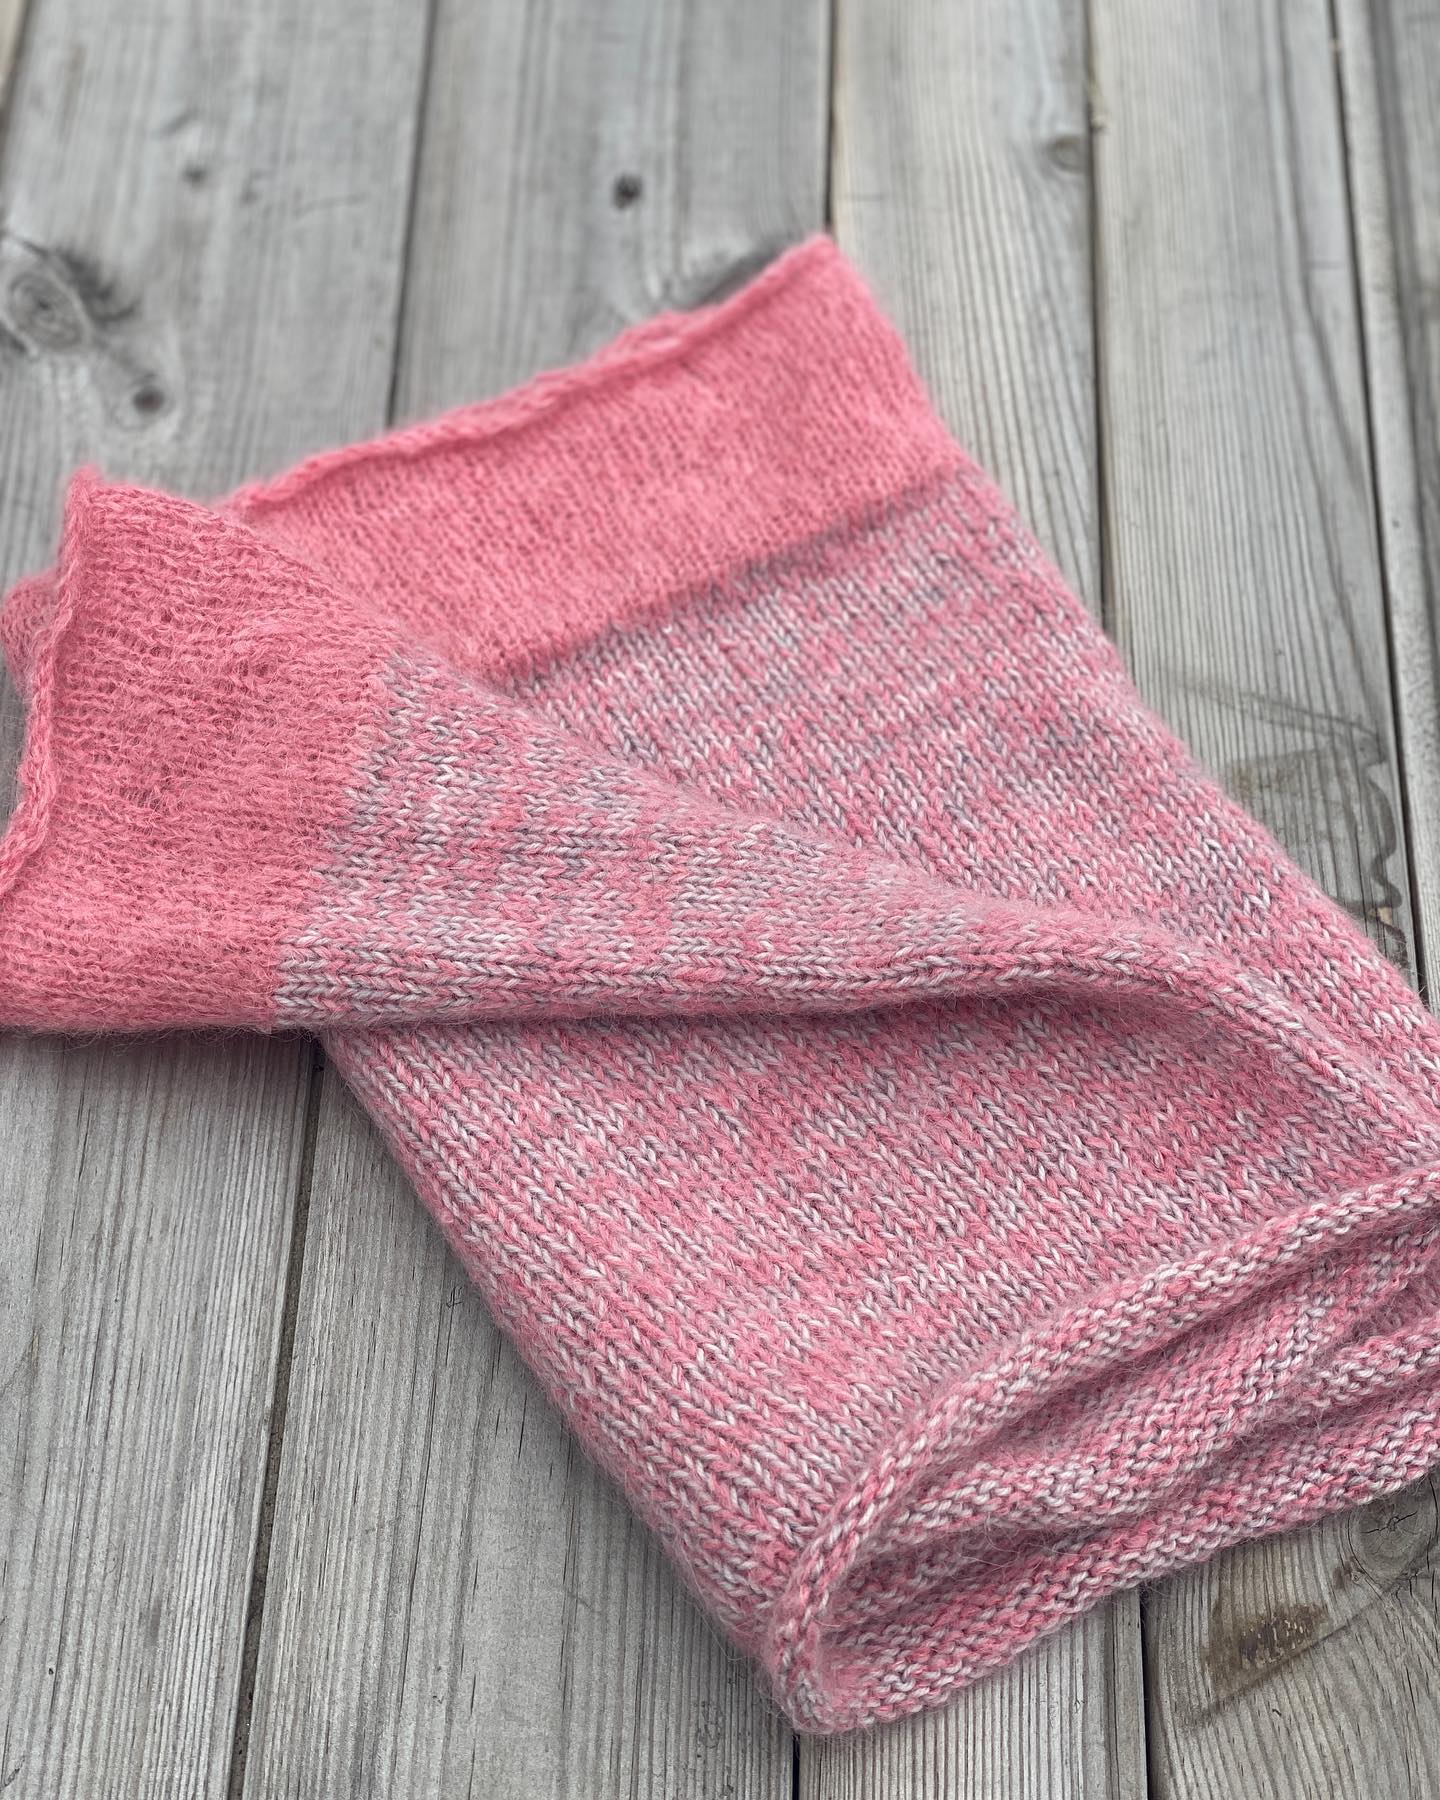 A pink and grey cowl lies on a table and is folded in half lengthways